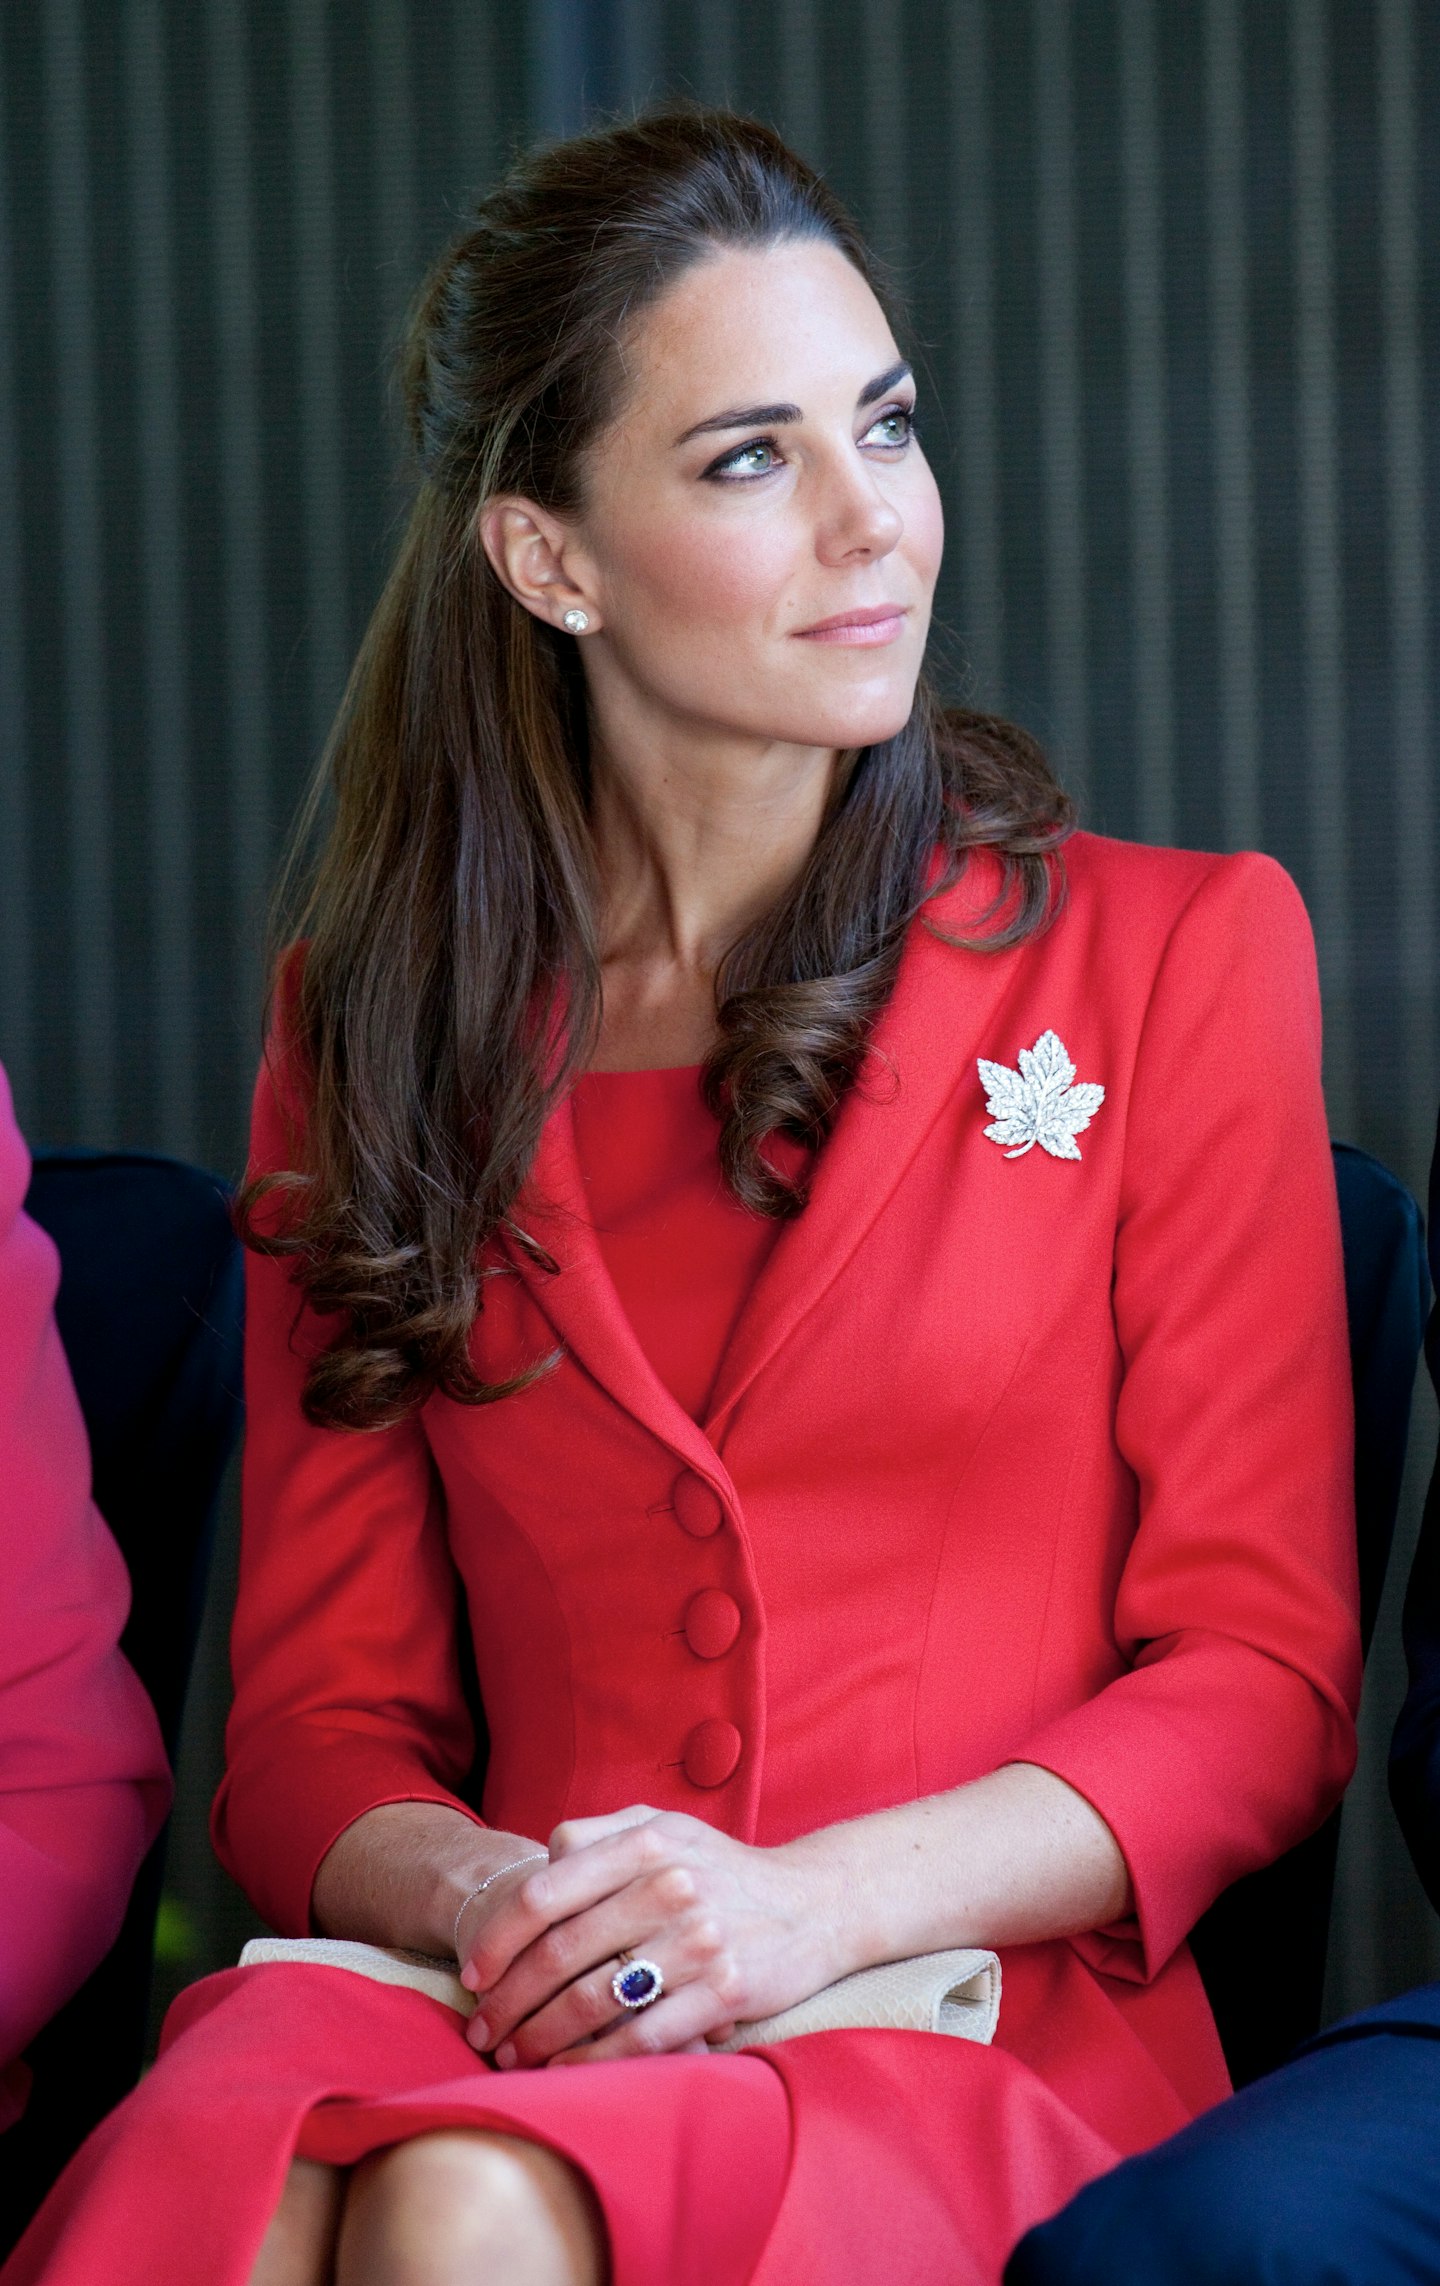 The Maple Leaf Brooch